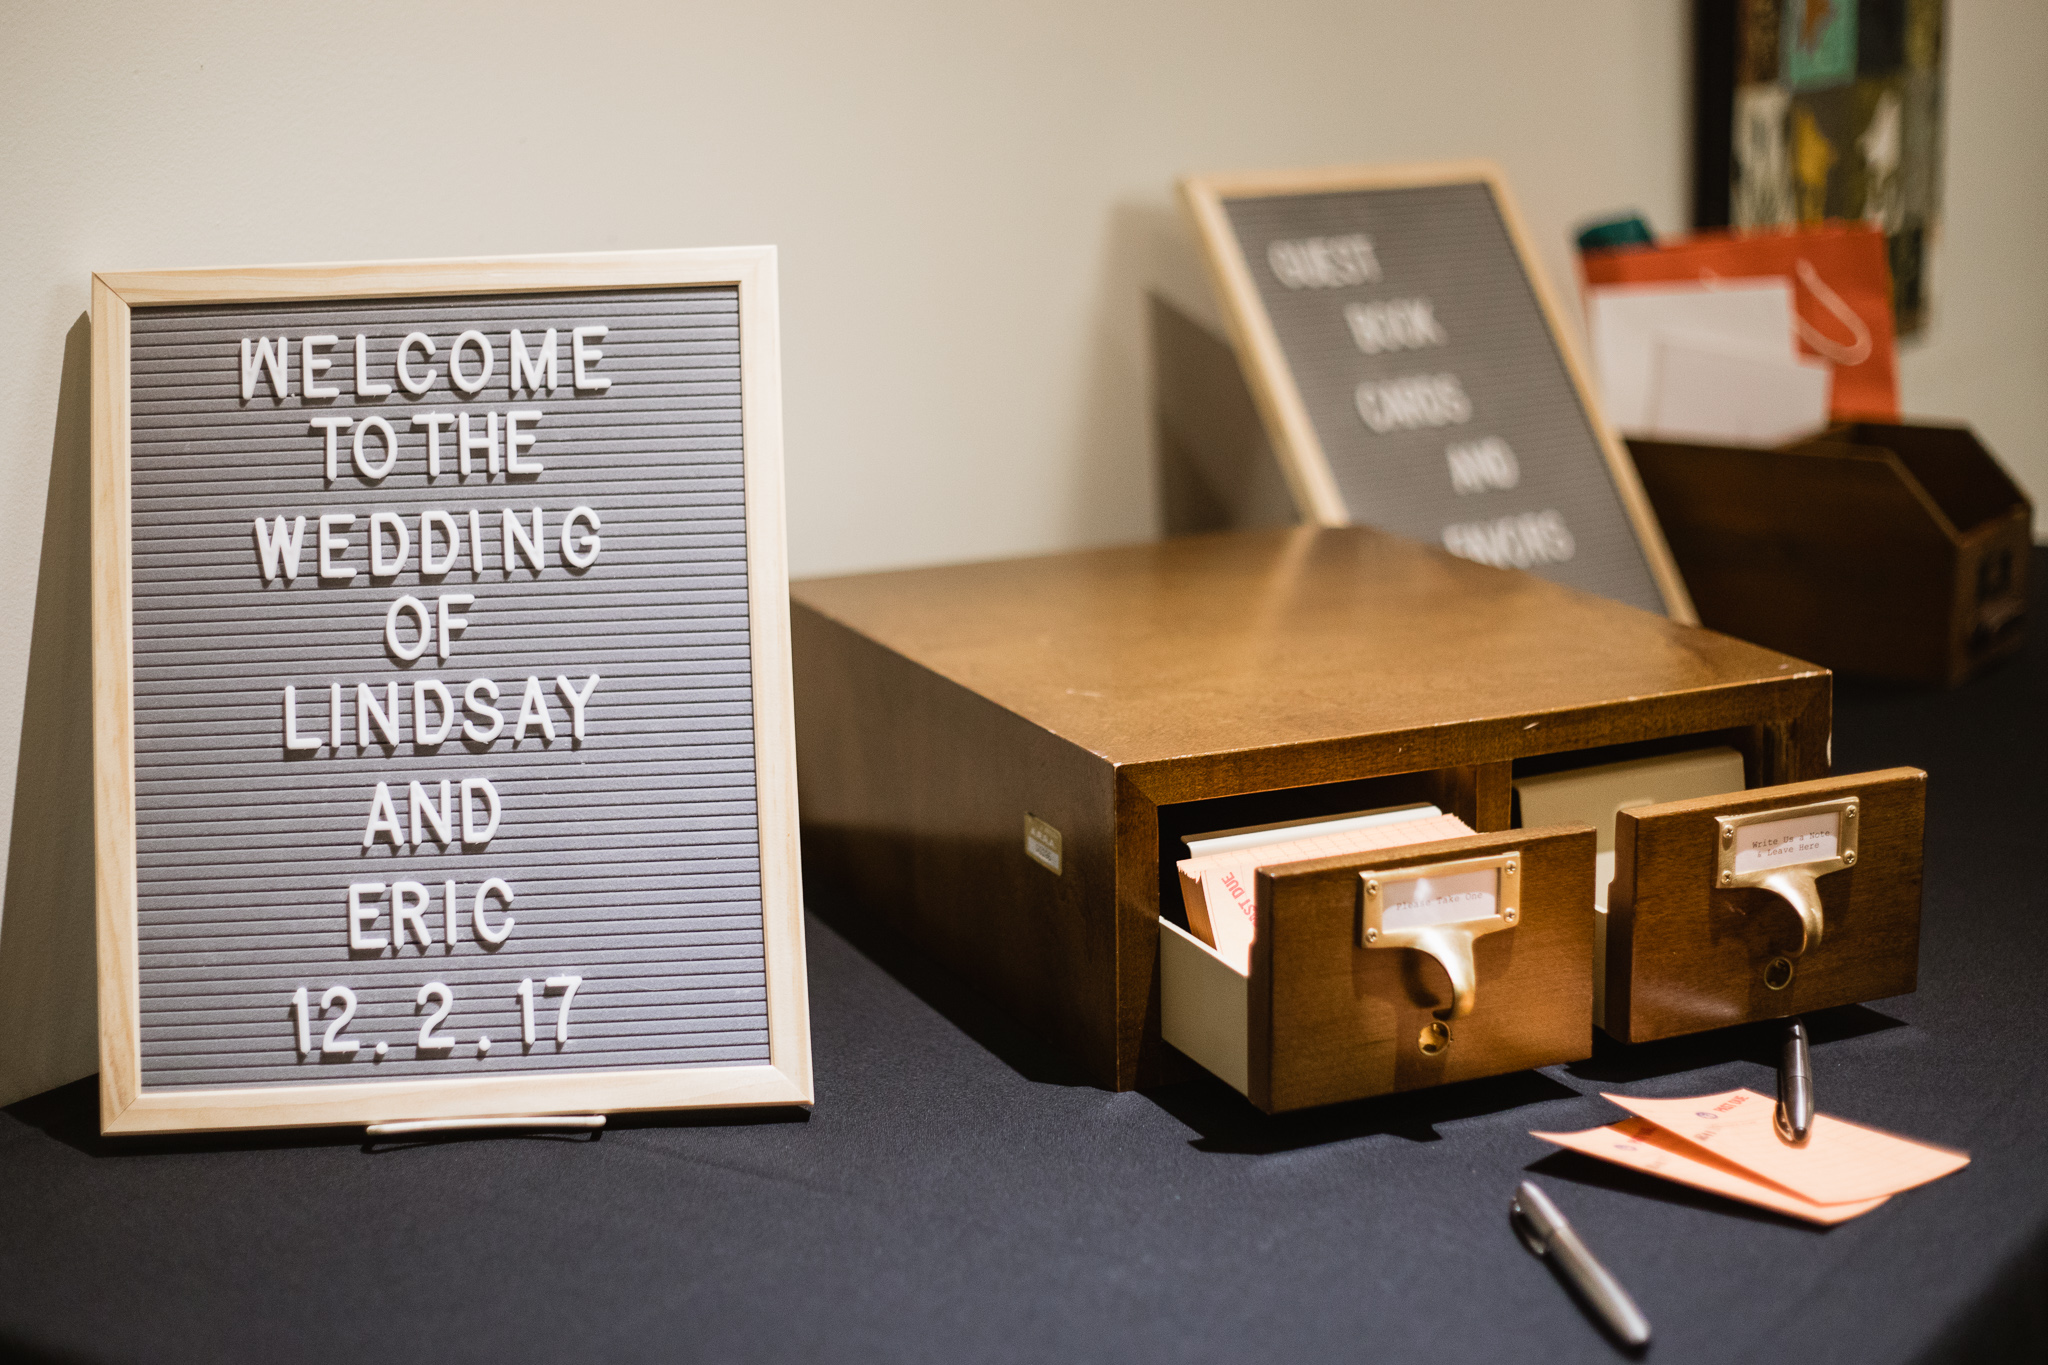 Book themed wedding welcome sign and library card guest book.